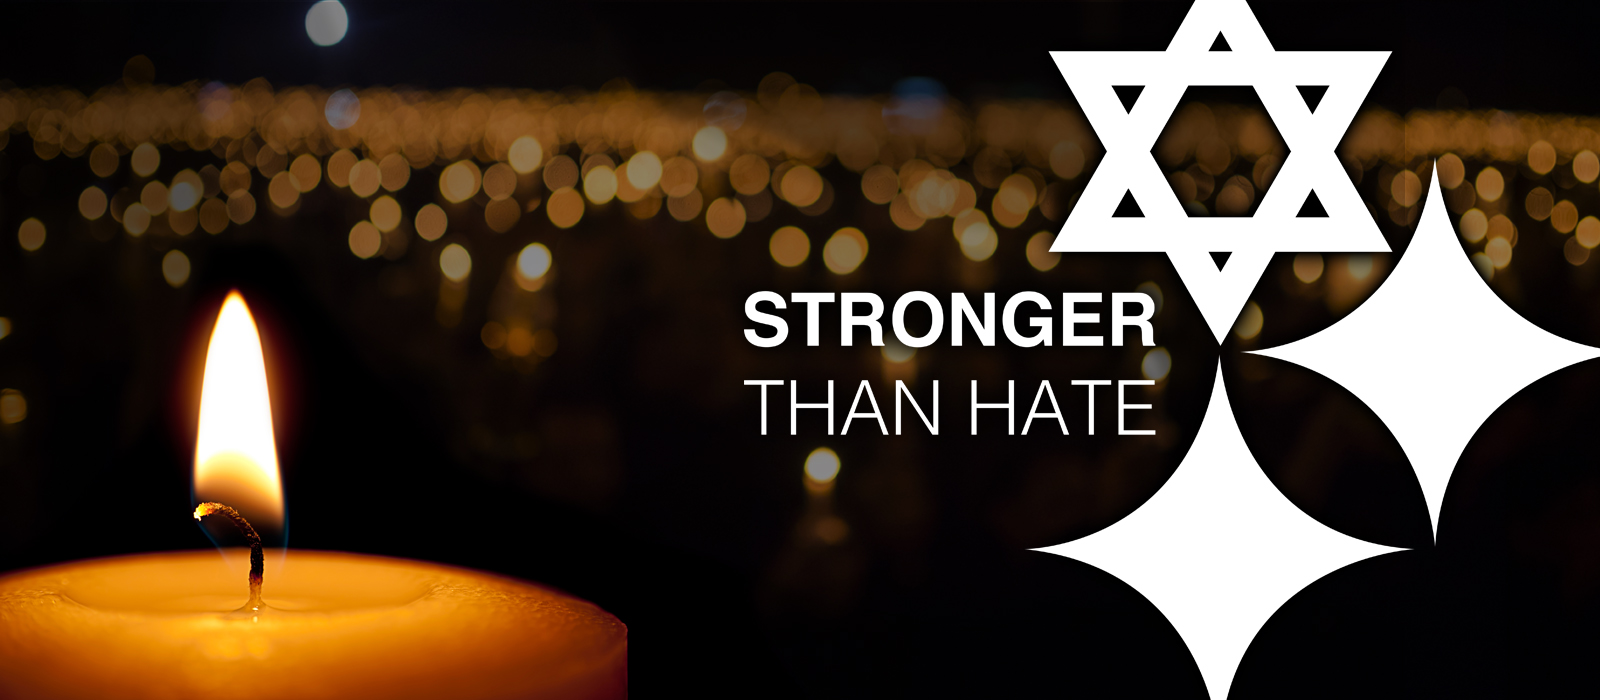 ONS Is Proud to Be Part of a City Stronger Than Hate